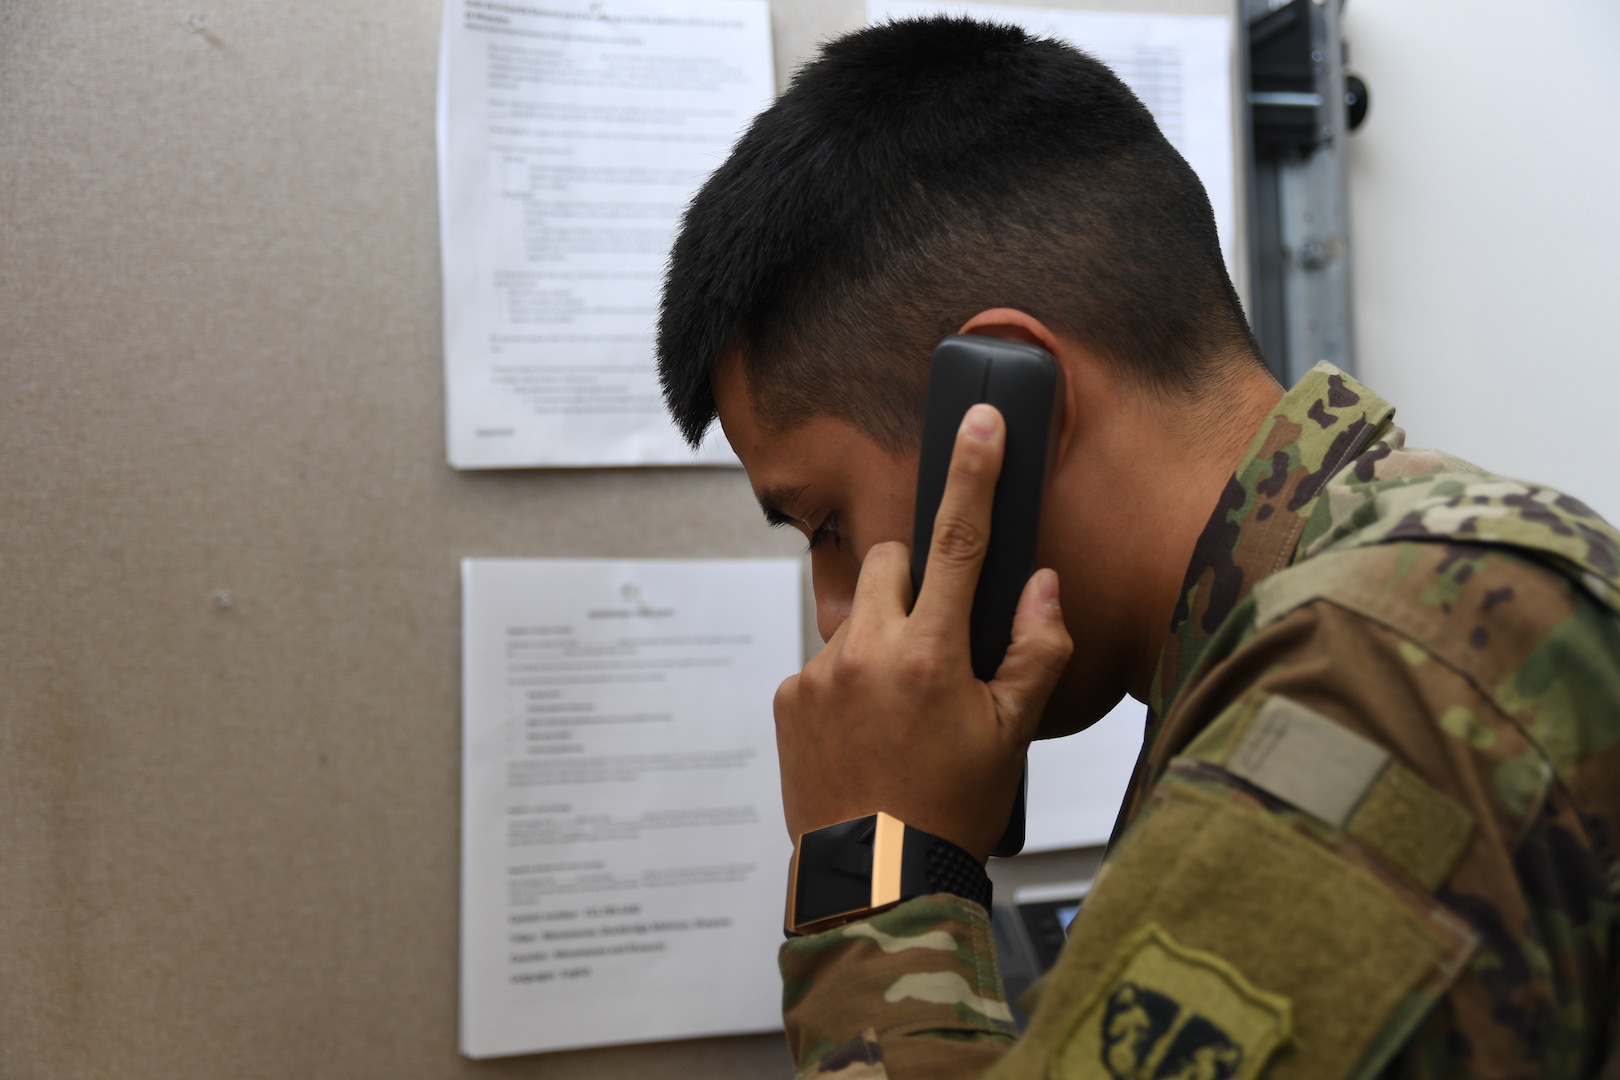 Wisconsin National Guard Spc. Erick Carranza informs people of COVID-19 test results in English or Spanish from a call center in Madison in May 2020. Thirty Guard Airmen and Soldiers are staffing the call center, with 16 of them bilingual in Spanish, Hmong, Portuguese, French, Mandarin Chinese, or German.